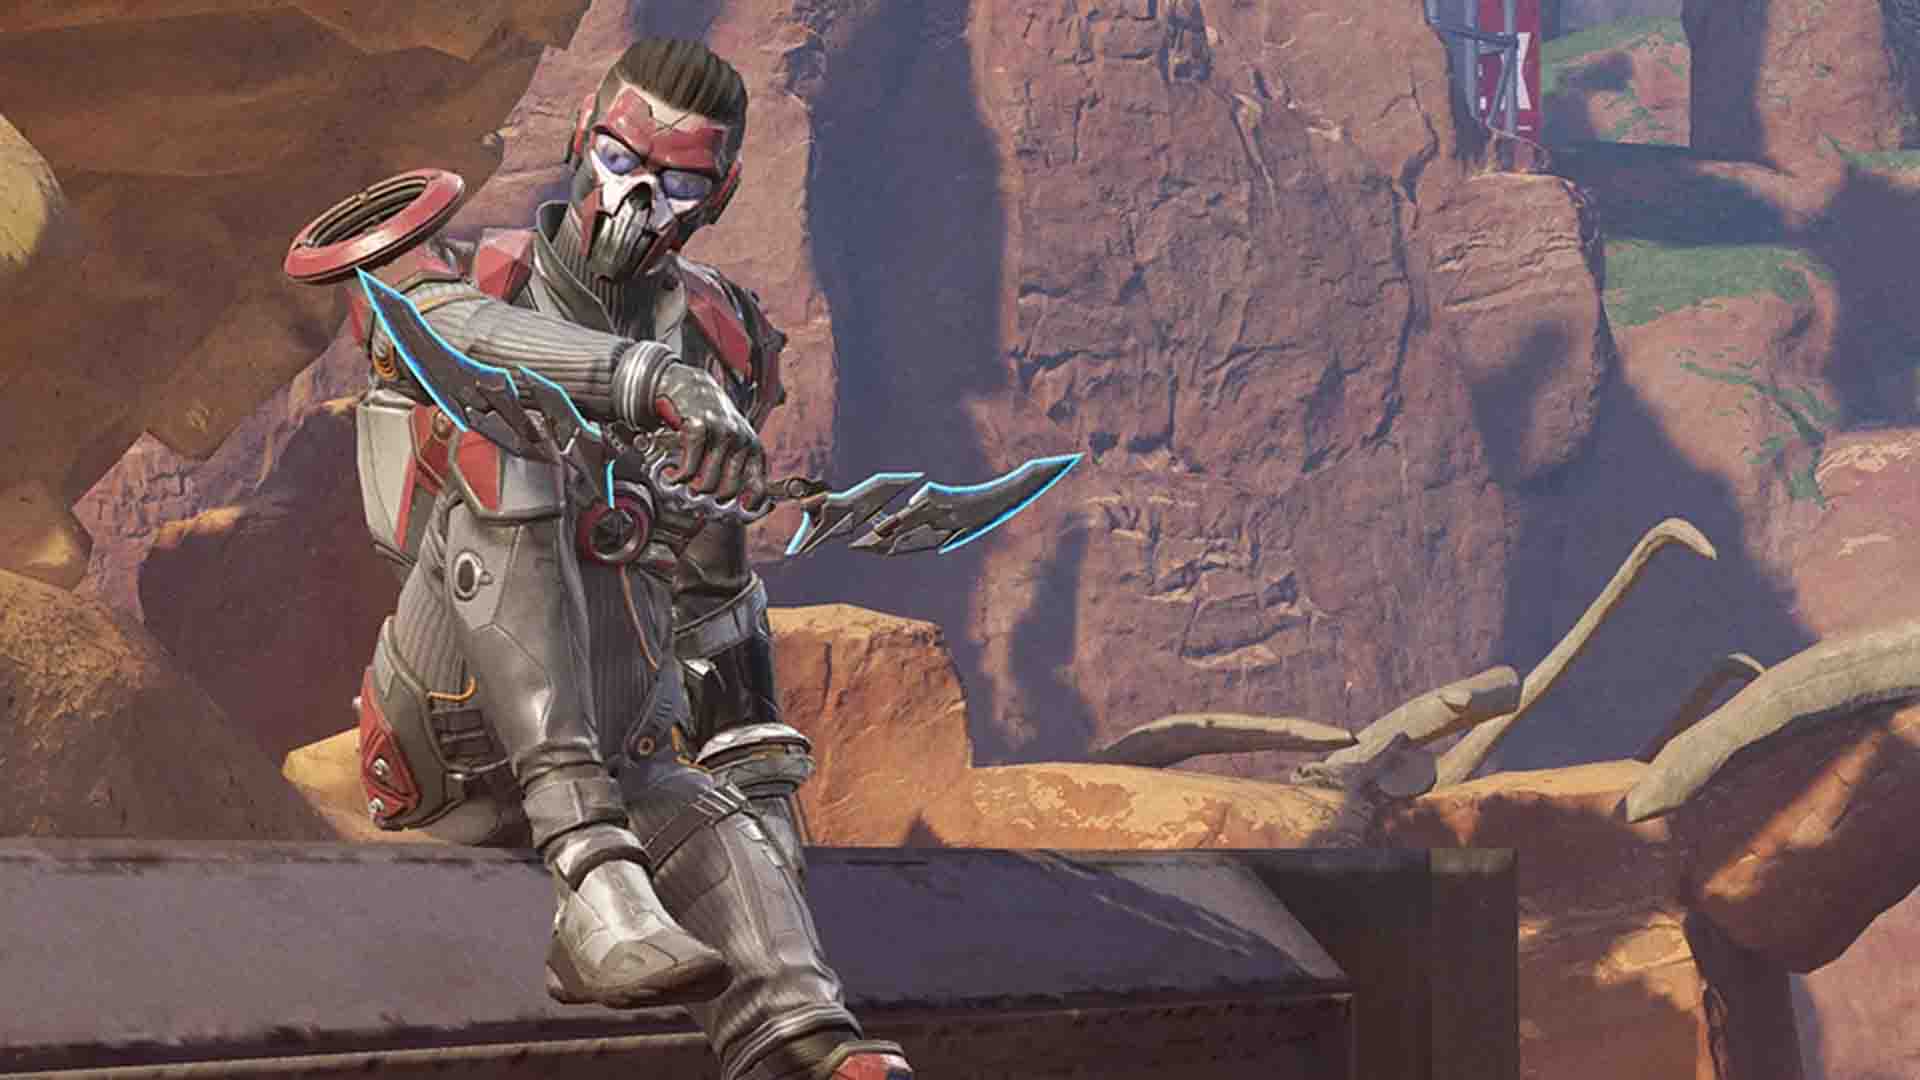 Apex Legends Mobile' is shutting down